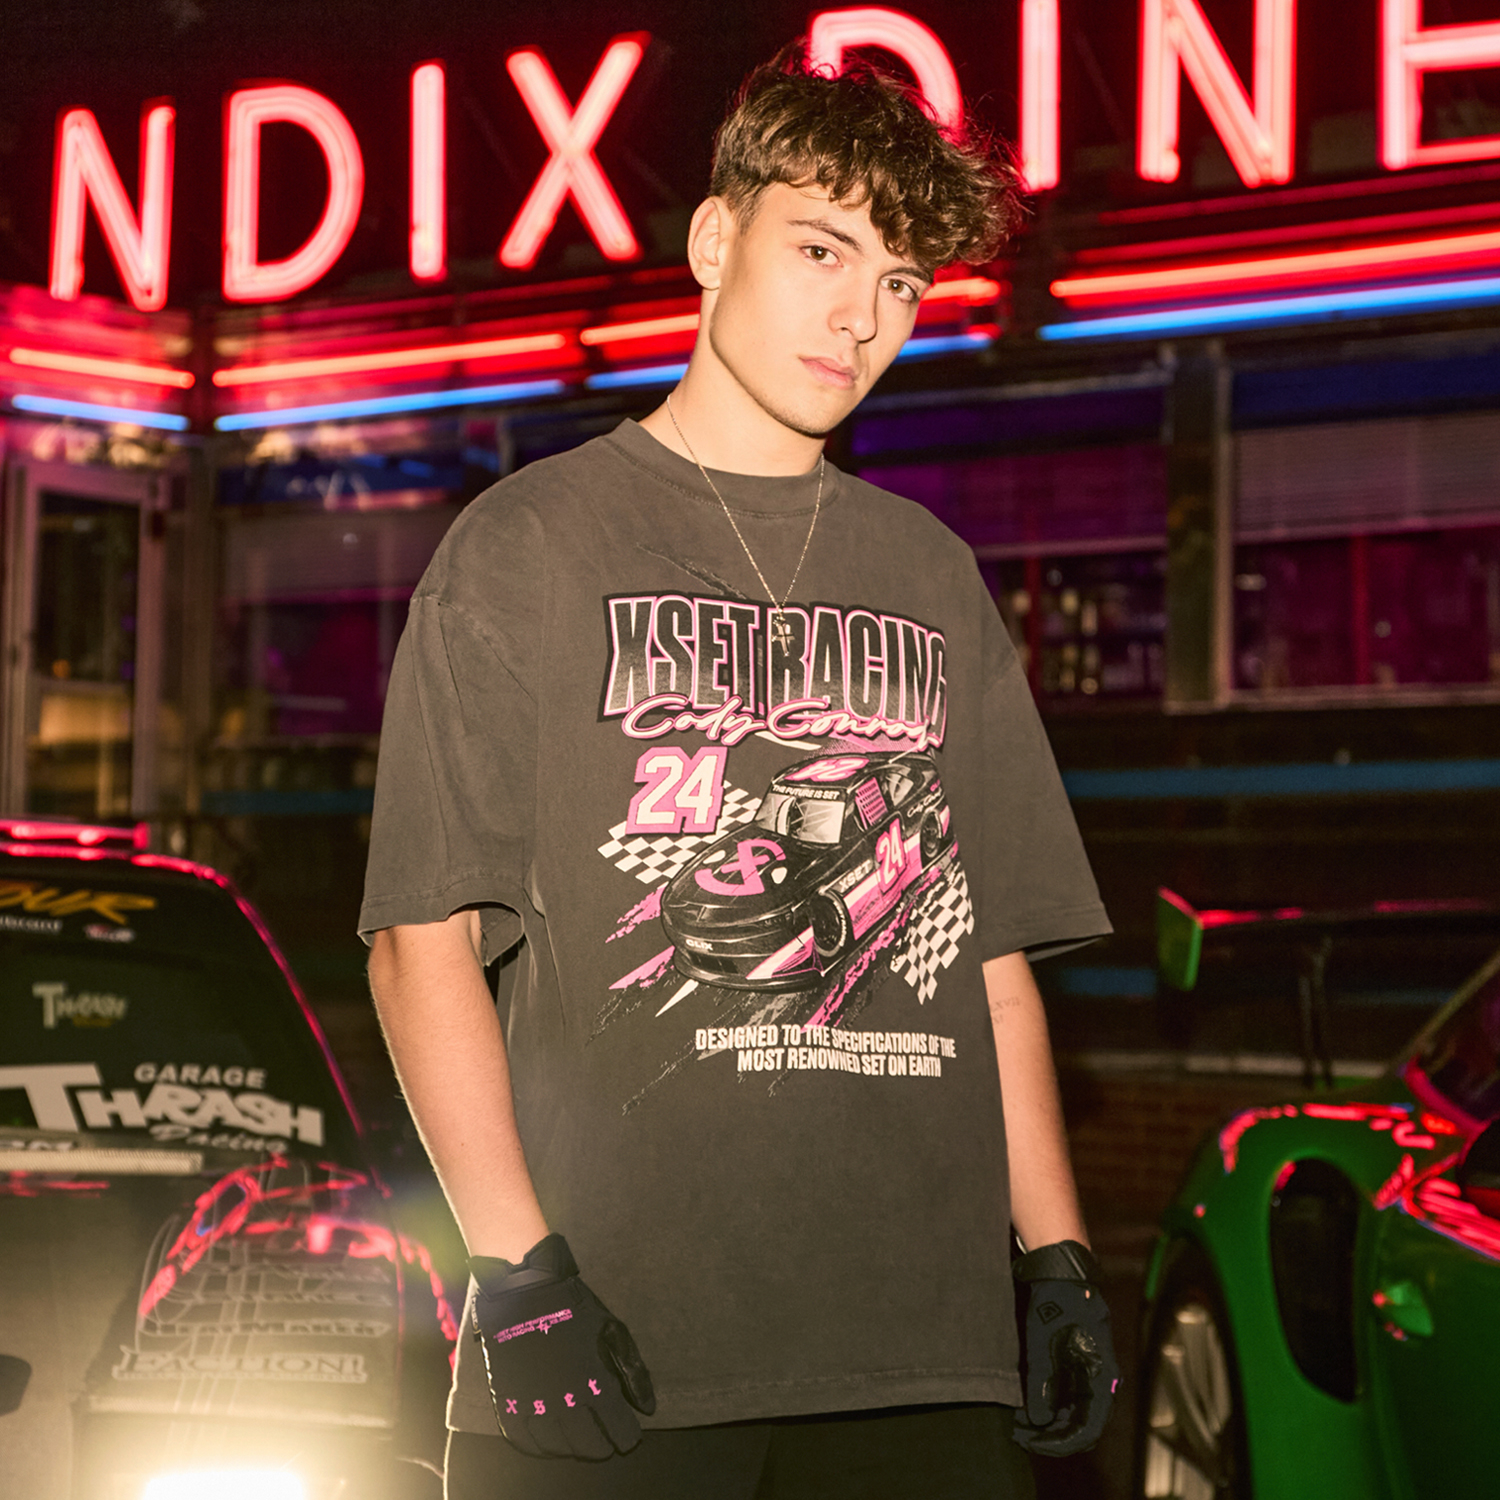 A young man stands in front of a neon-lit diner, wearing a graphic racing shirt and fingerless gloves